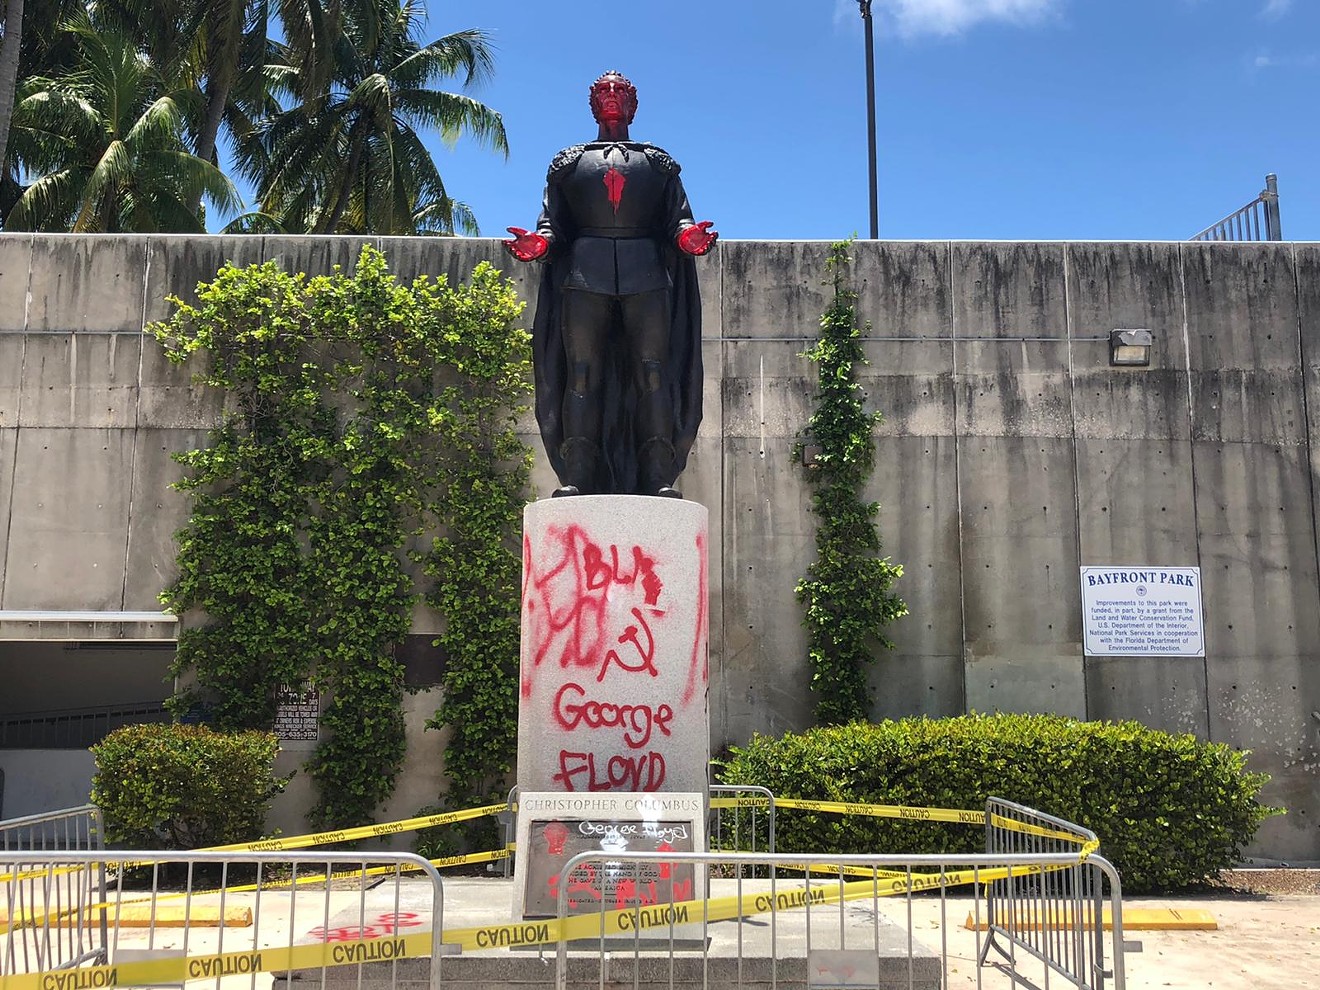 Protesters spray-painted a statue of Christopher Columbus in Bayfront Park.